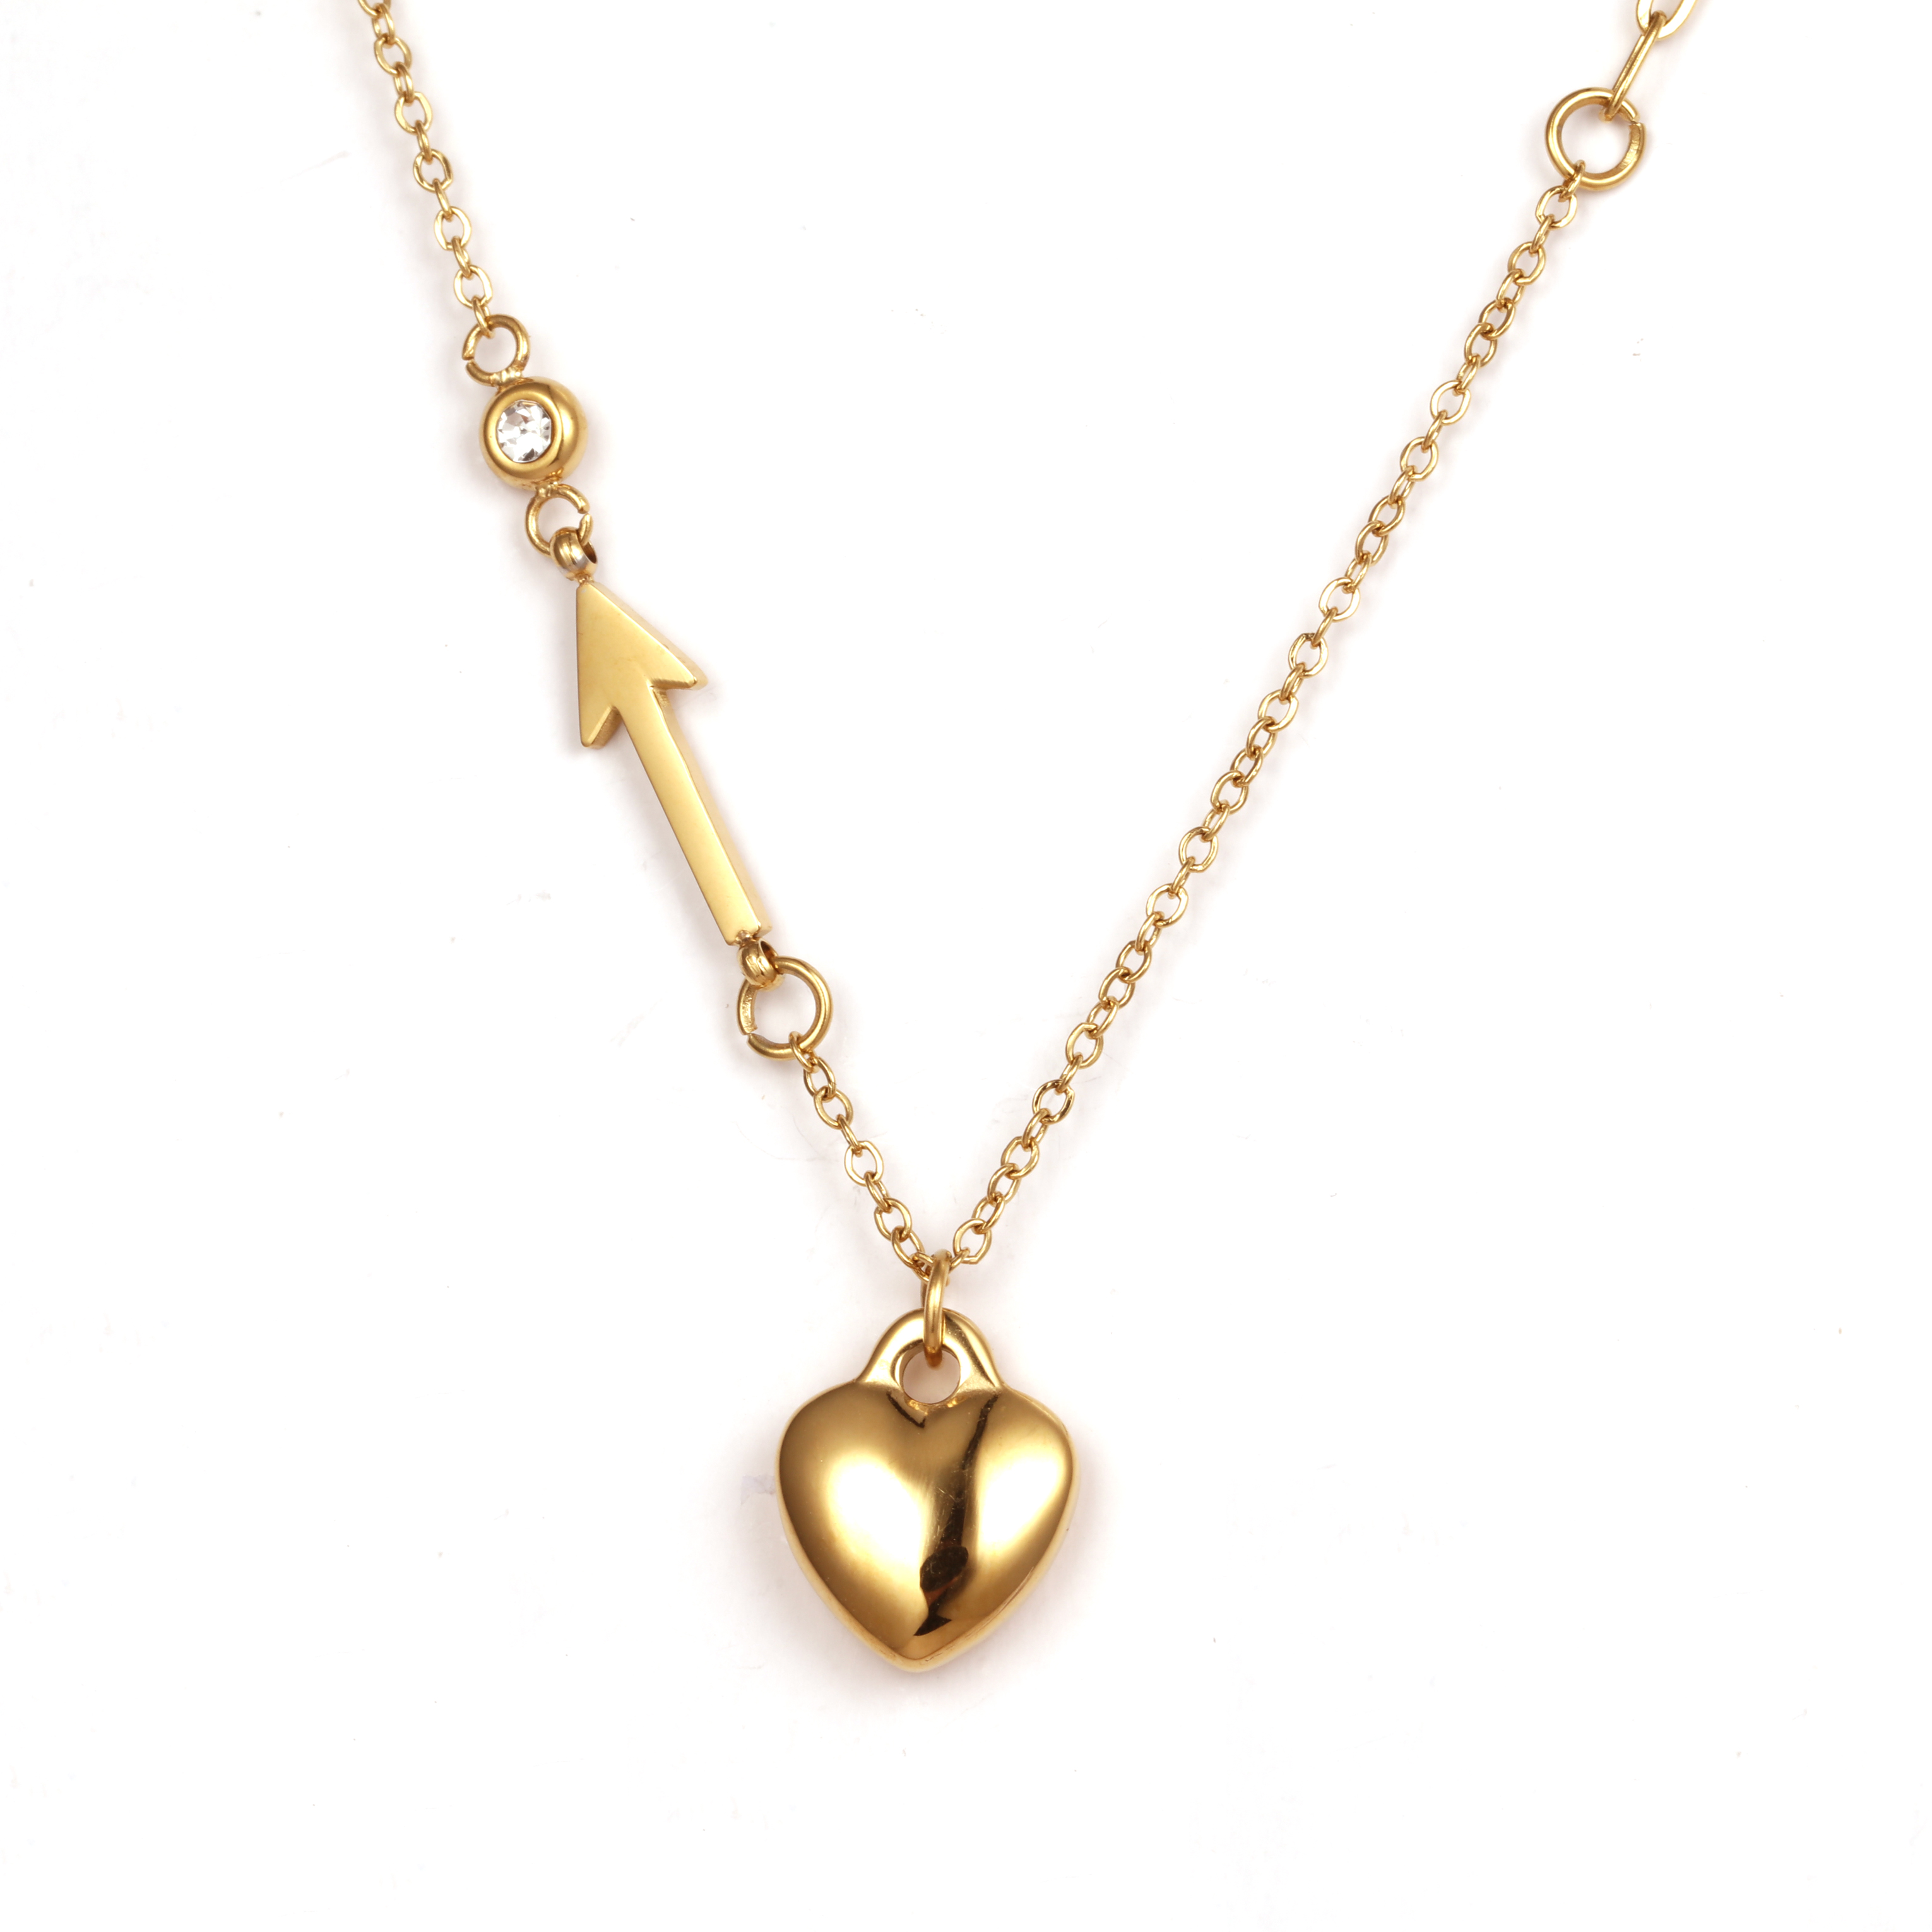 Heart Shaped Pendant Fasion Necklace